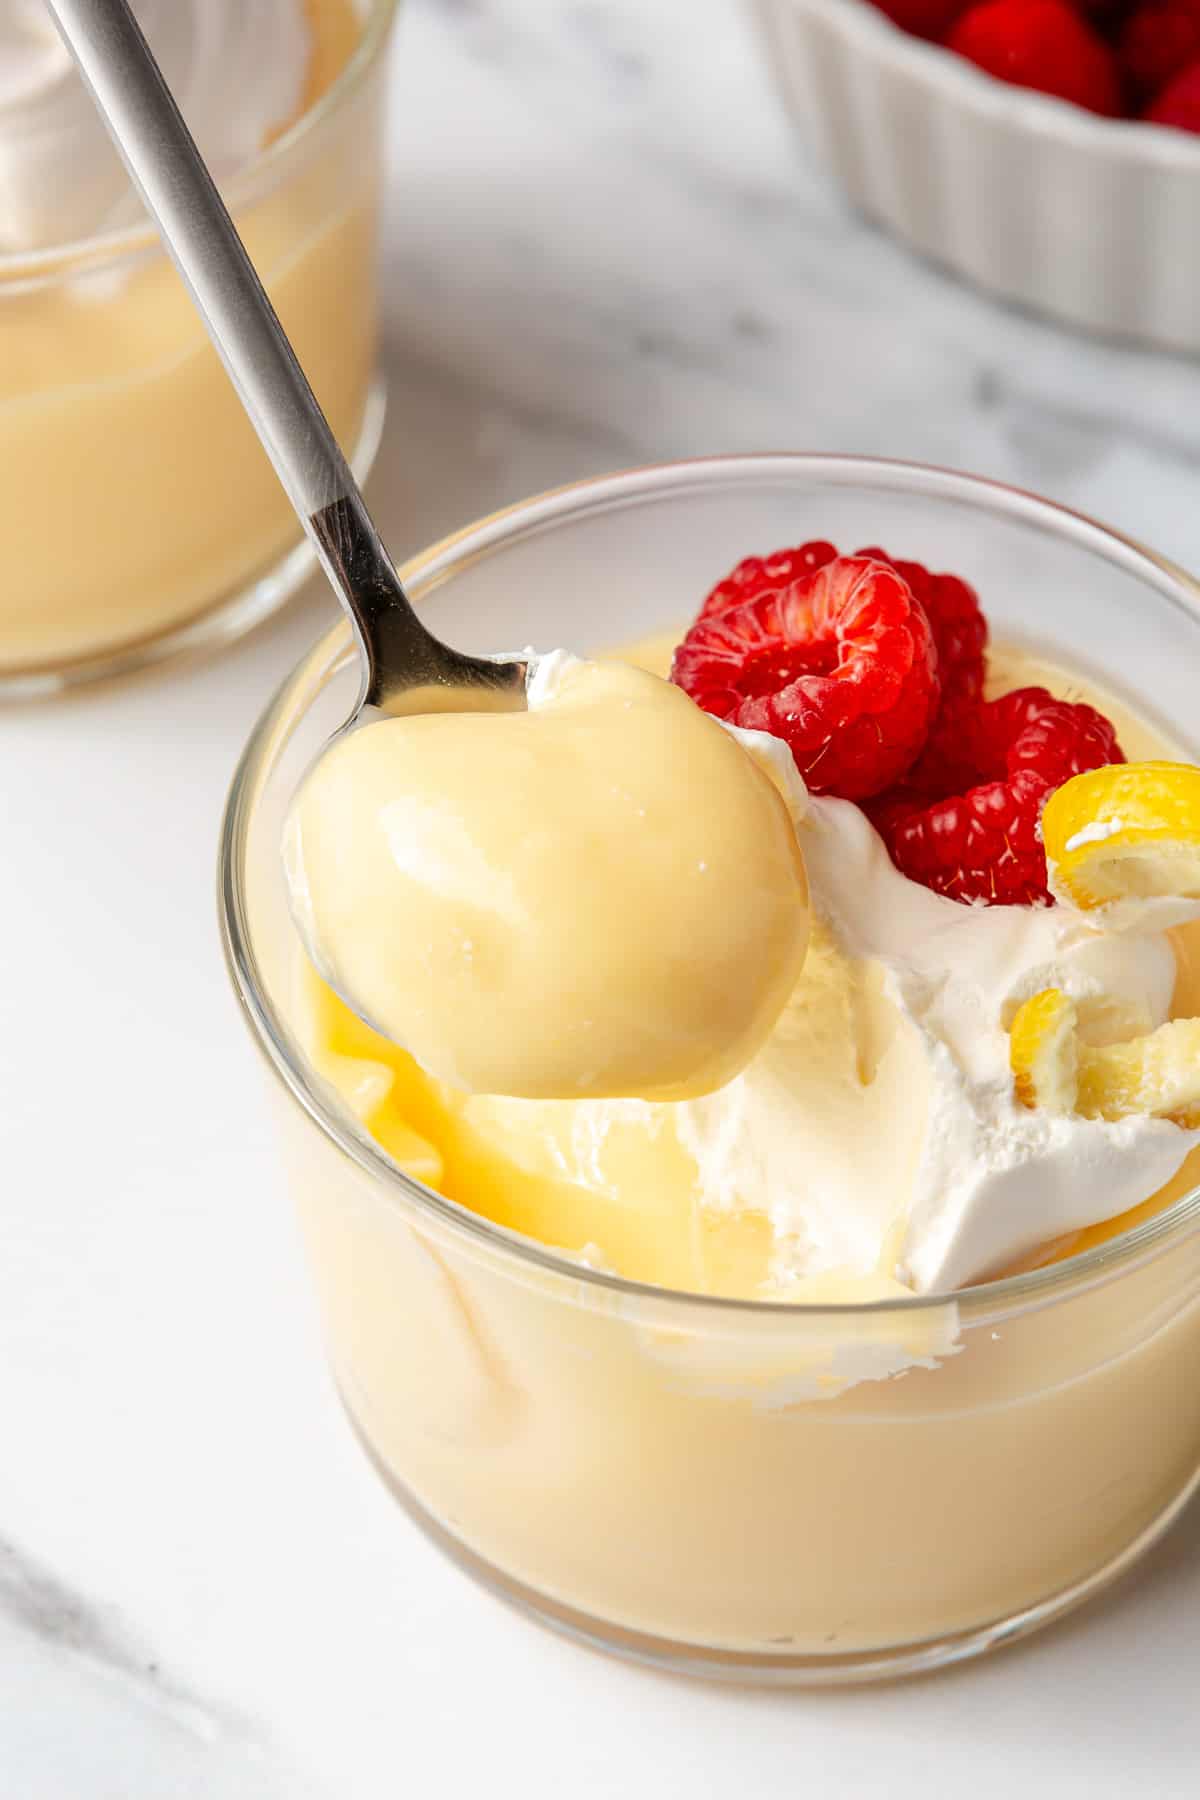 Spoon lifting up a bite of lemon pudding from a small dish to show smooth and creamy texture.